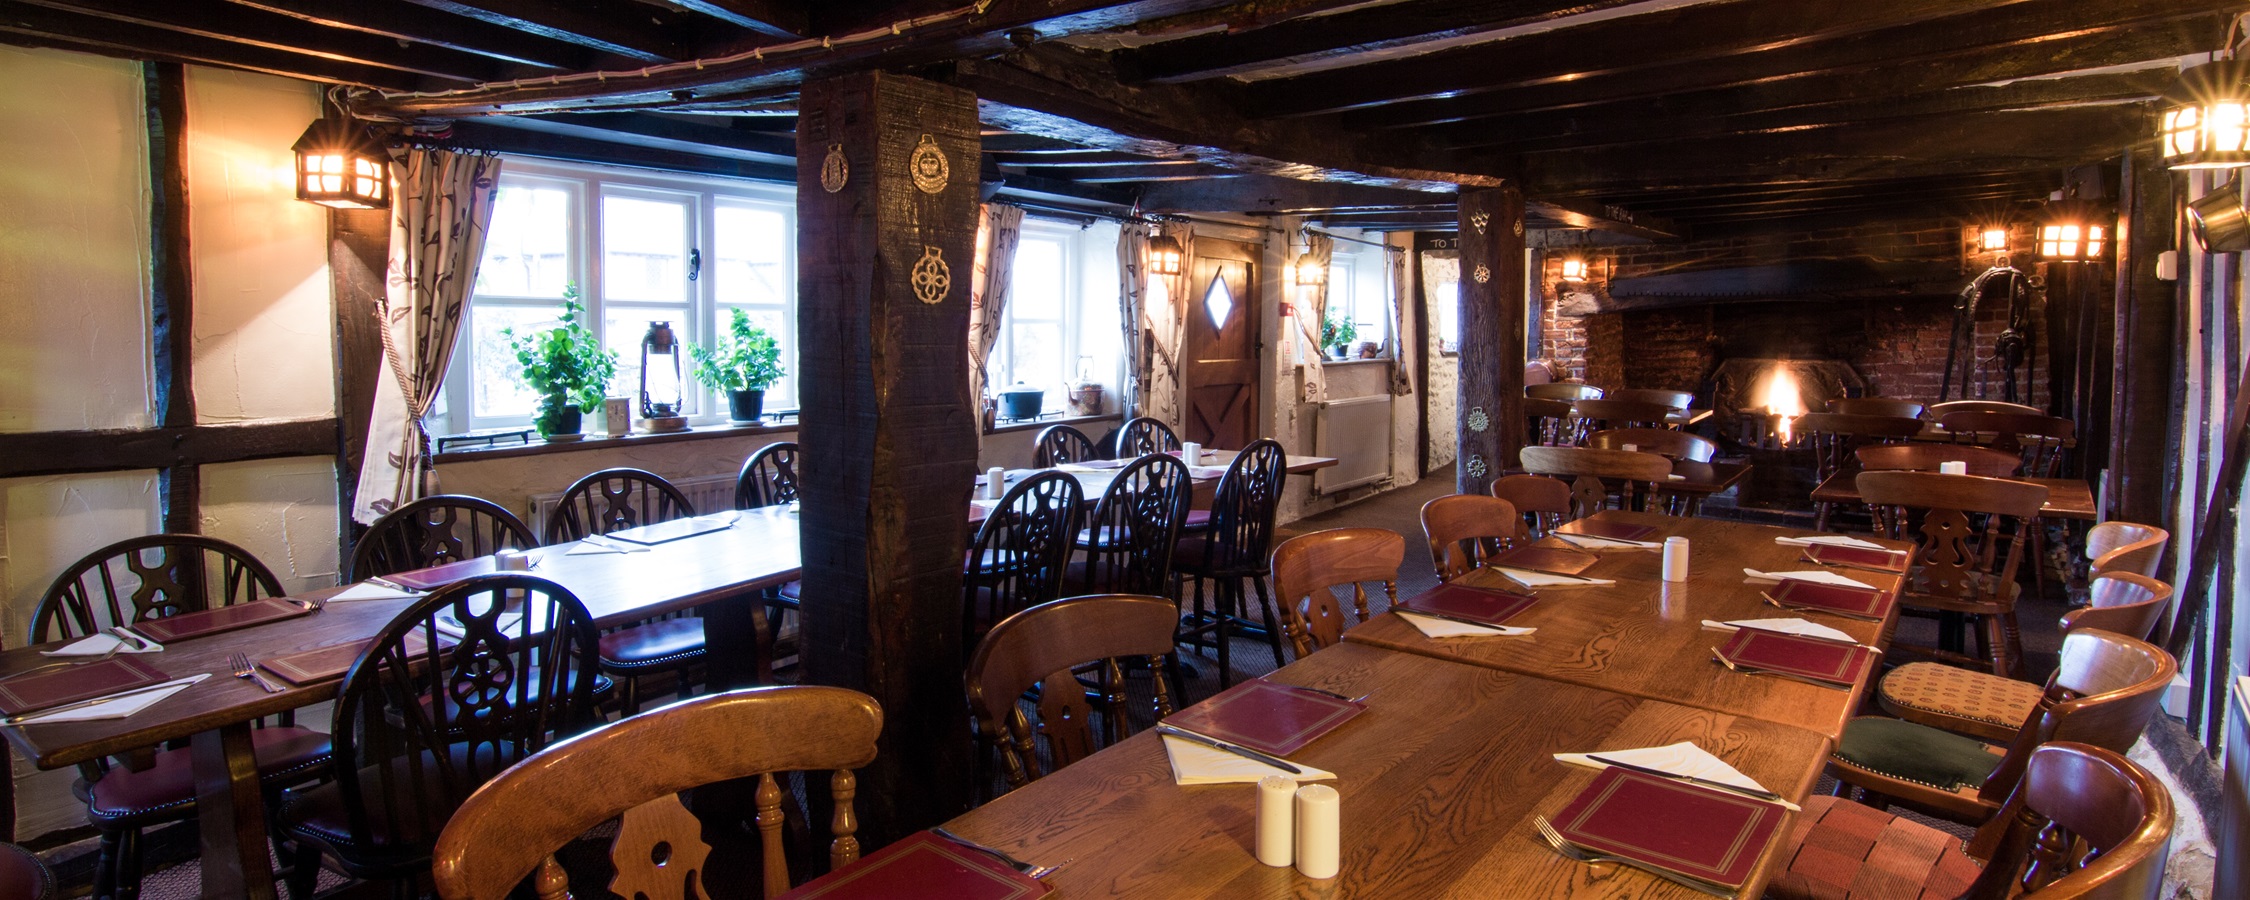 Functions - Characterful restaurant with plenty of space for group bookings